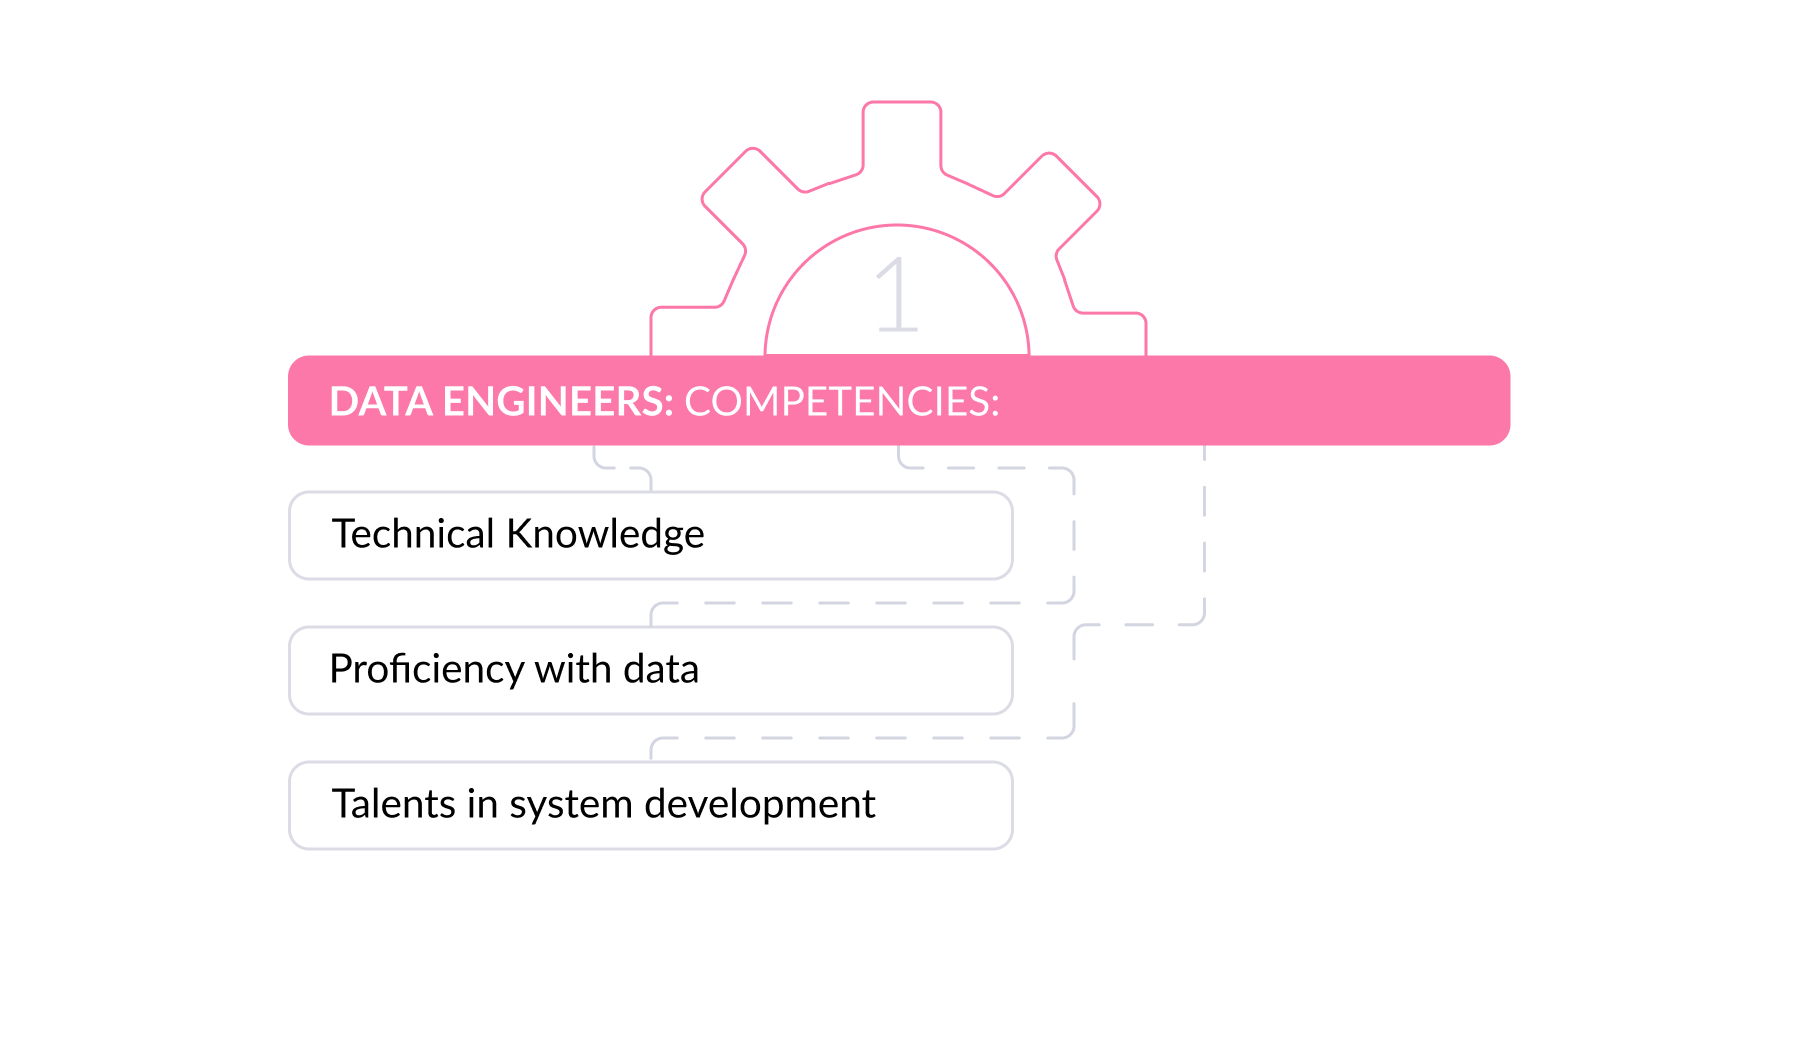 Competencies of a Data Engineer